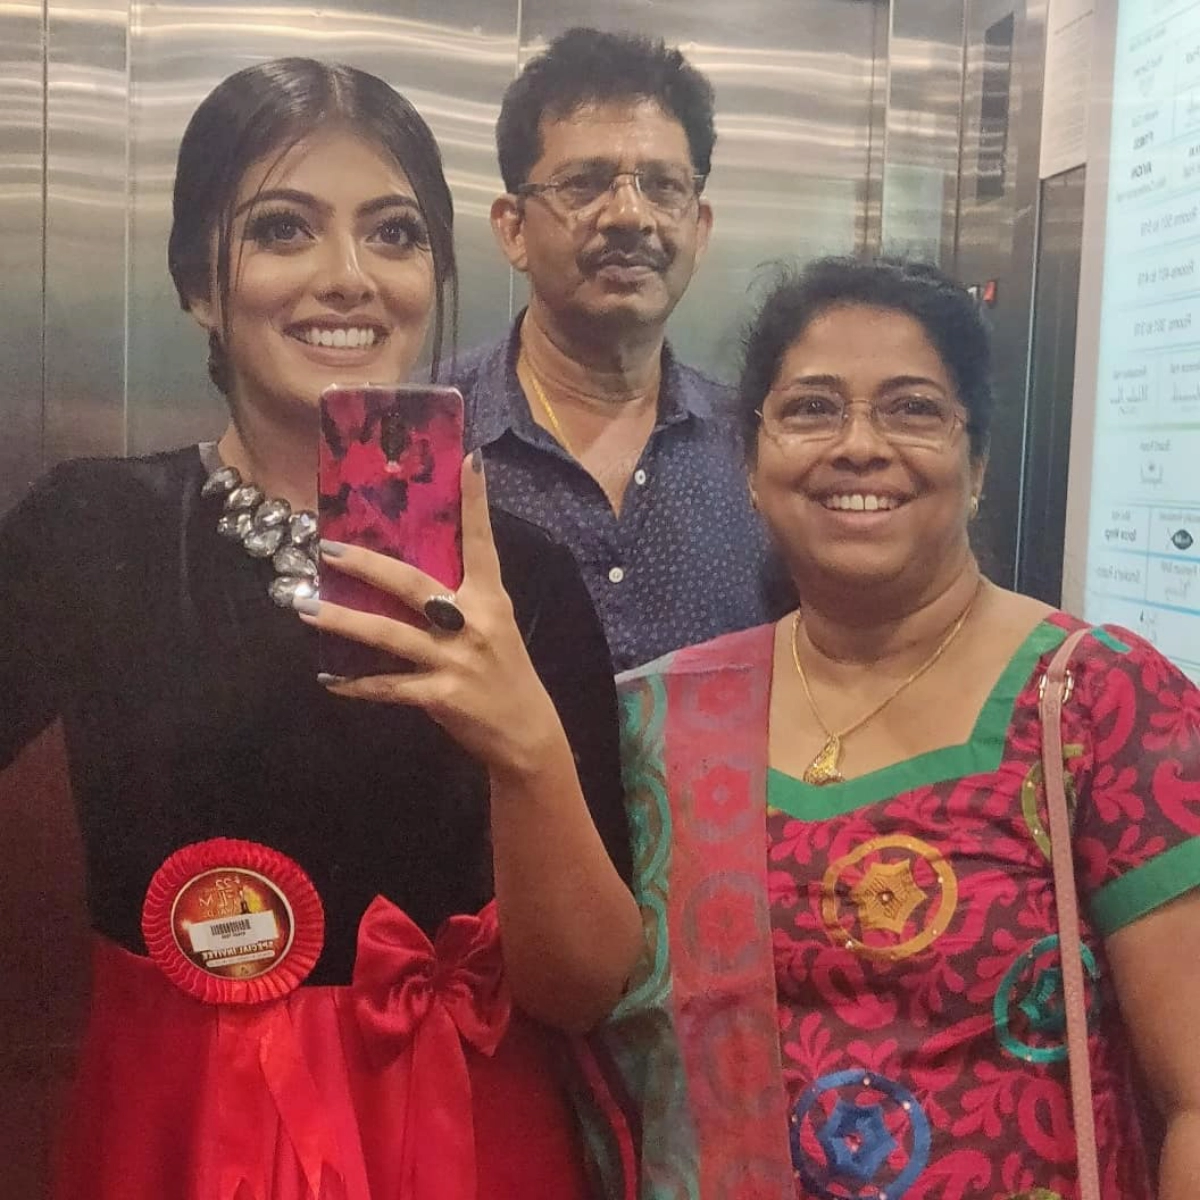 Merin Philip family photo with her father Philip C Mathew and mother Daisy Philip